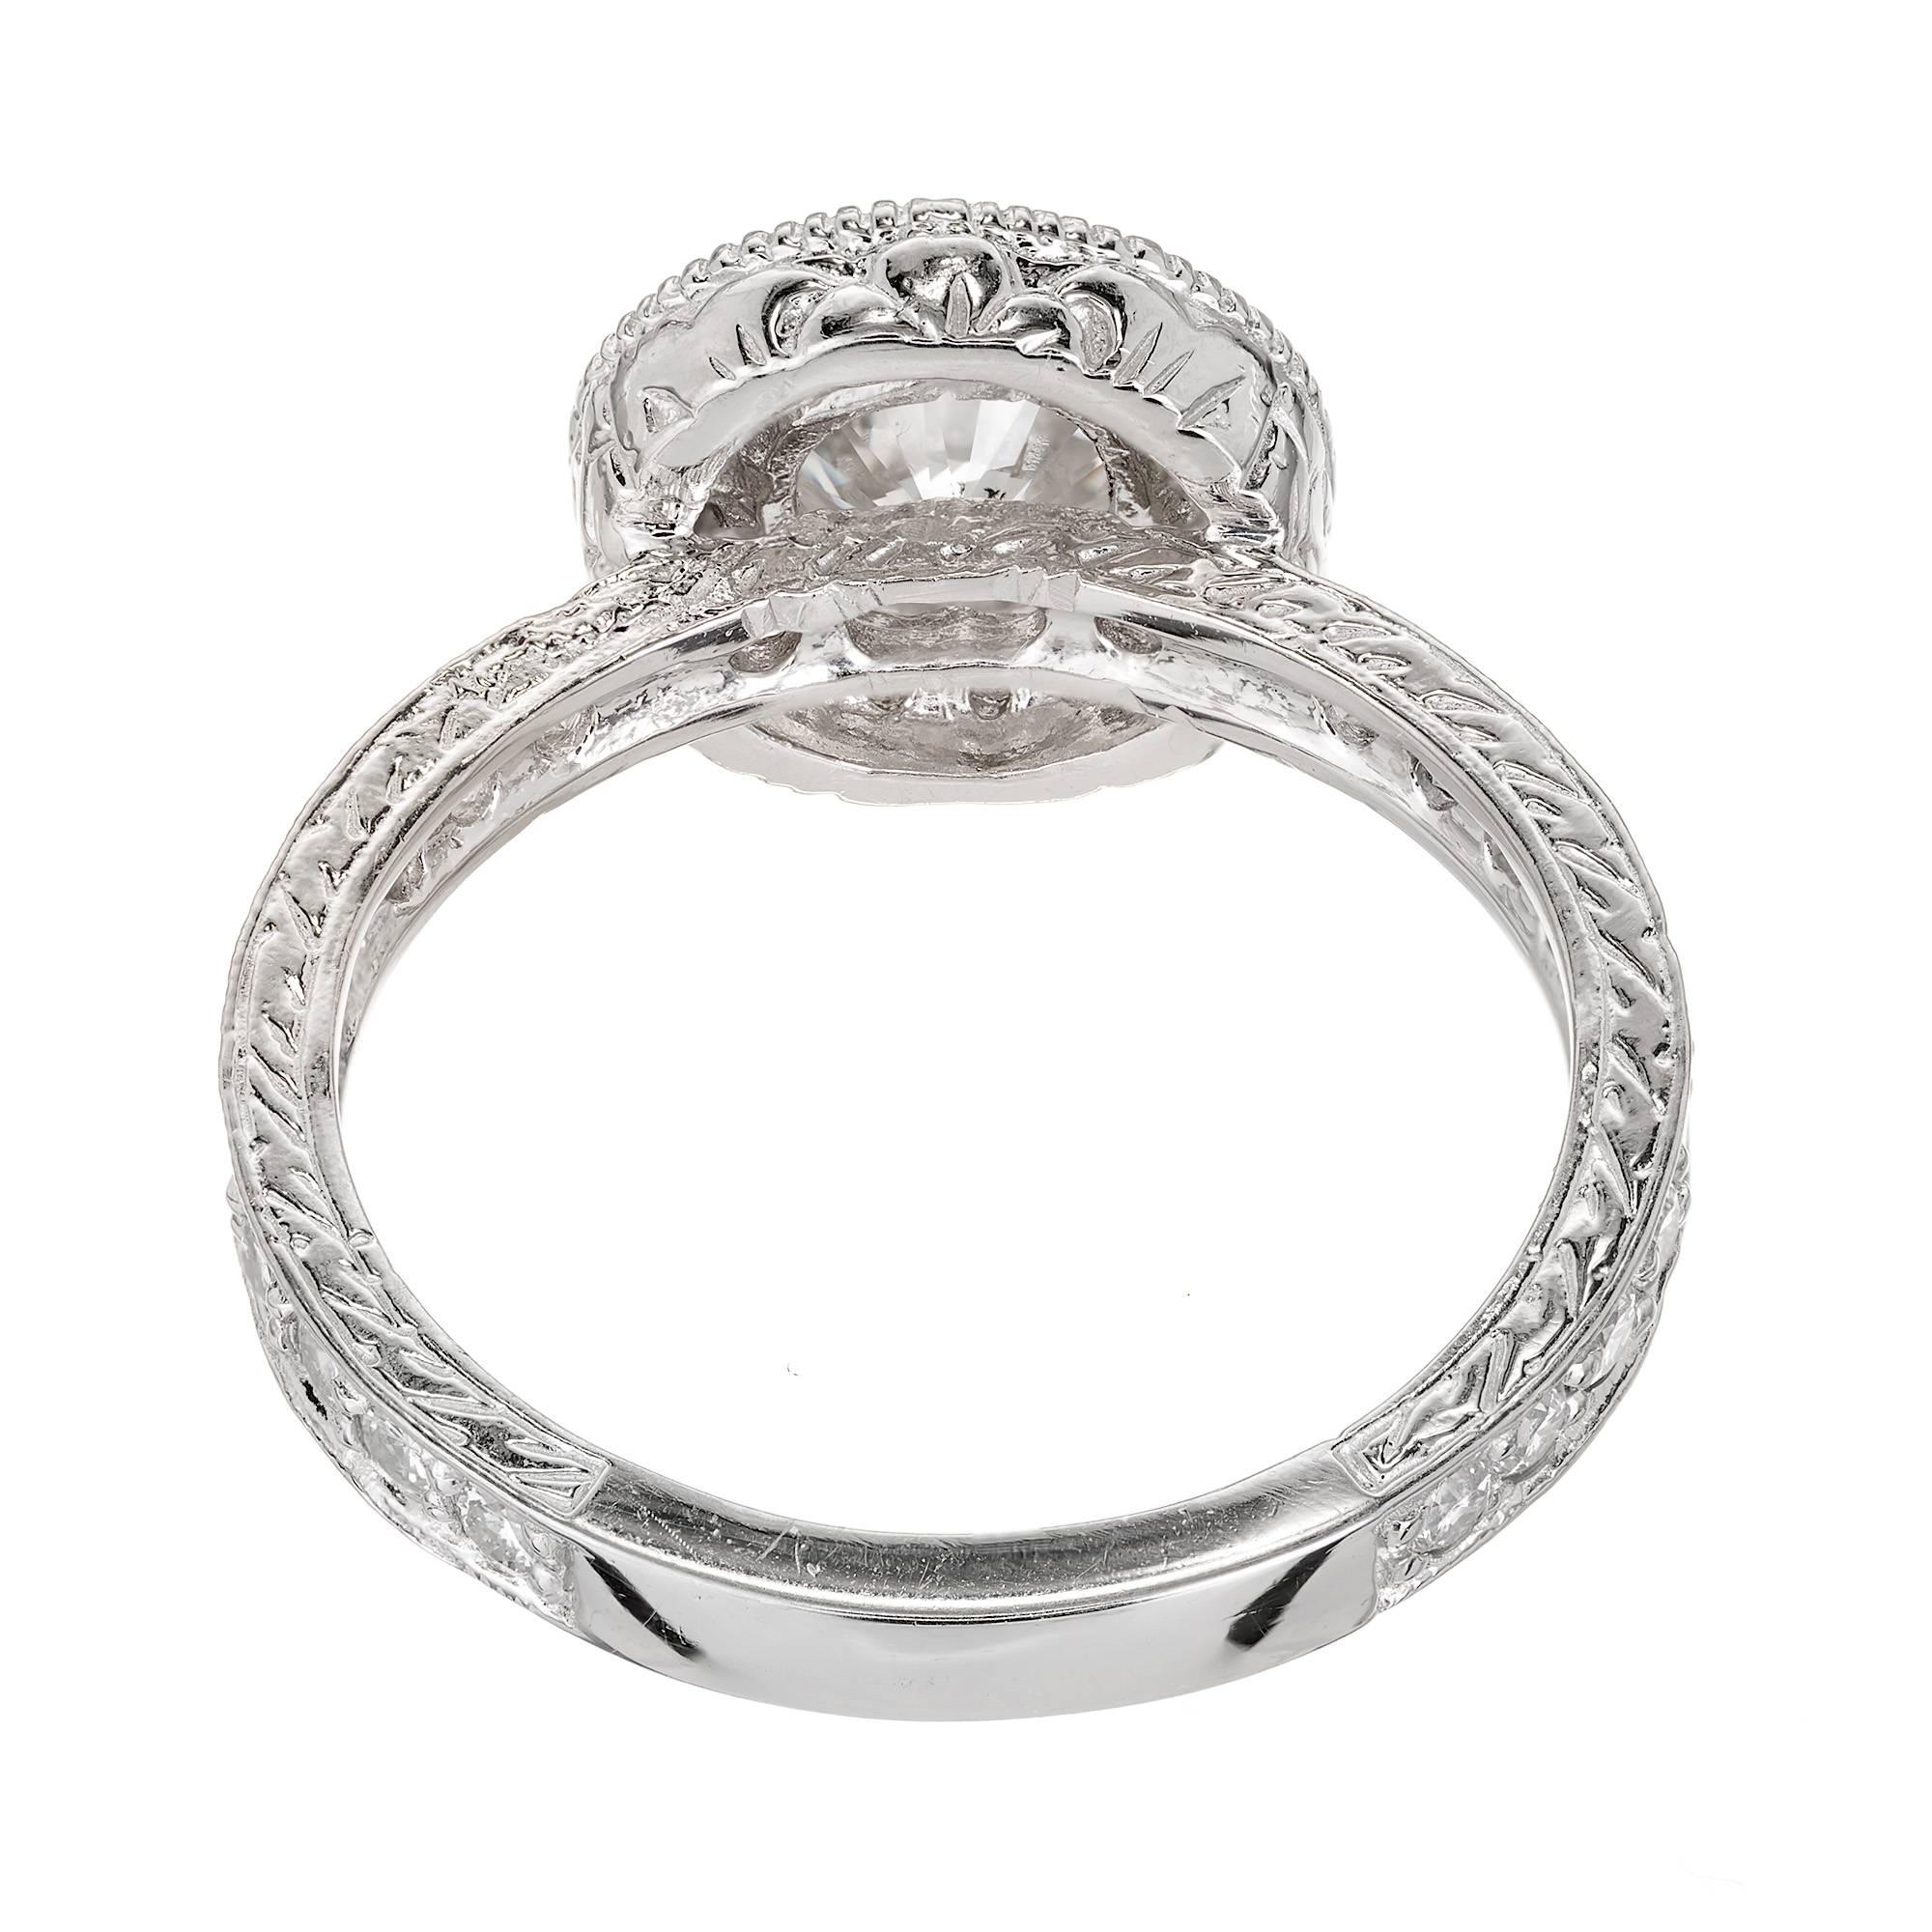 Peter Suchy 1.01 Carat Diamond Micro Pave Engraved Platinum Engagement Ring In Good Condition For Sale In Stamford, CT